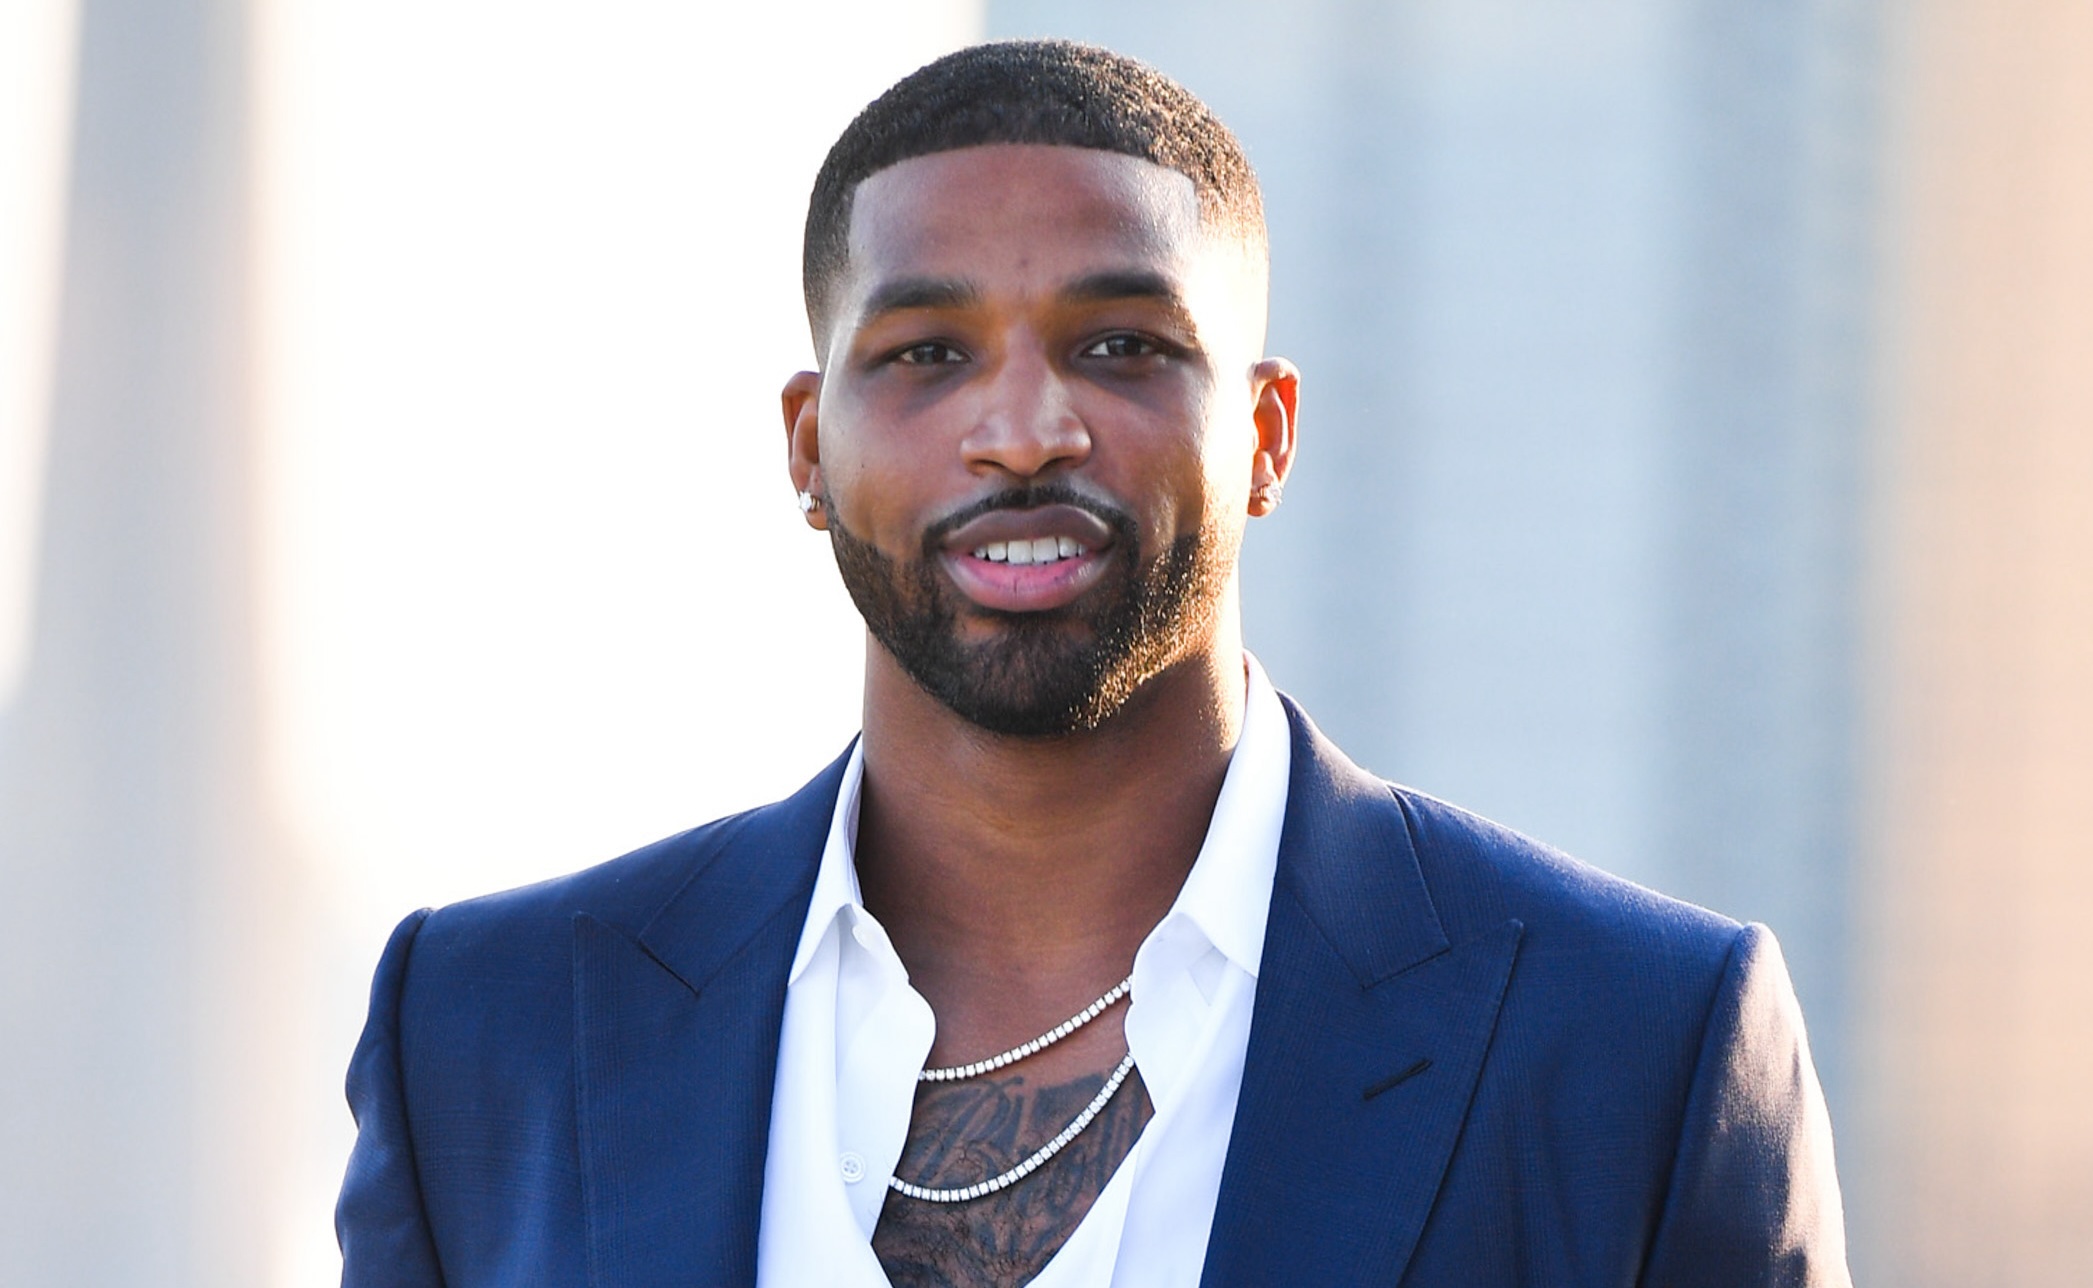 Khloe Kardashian’s Ex Tristan Thompson Has Reportedly Missed Multiple Child Support Payments to Maralee Nichols